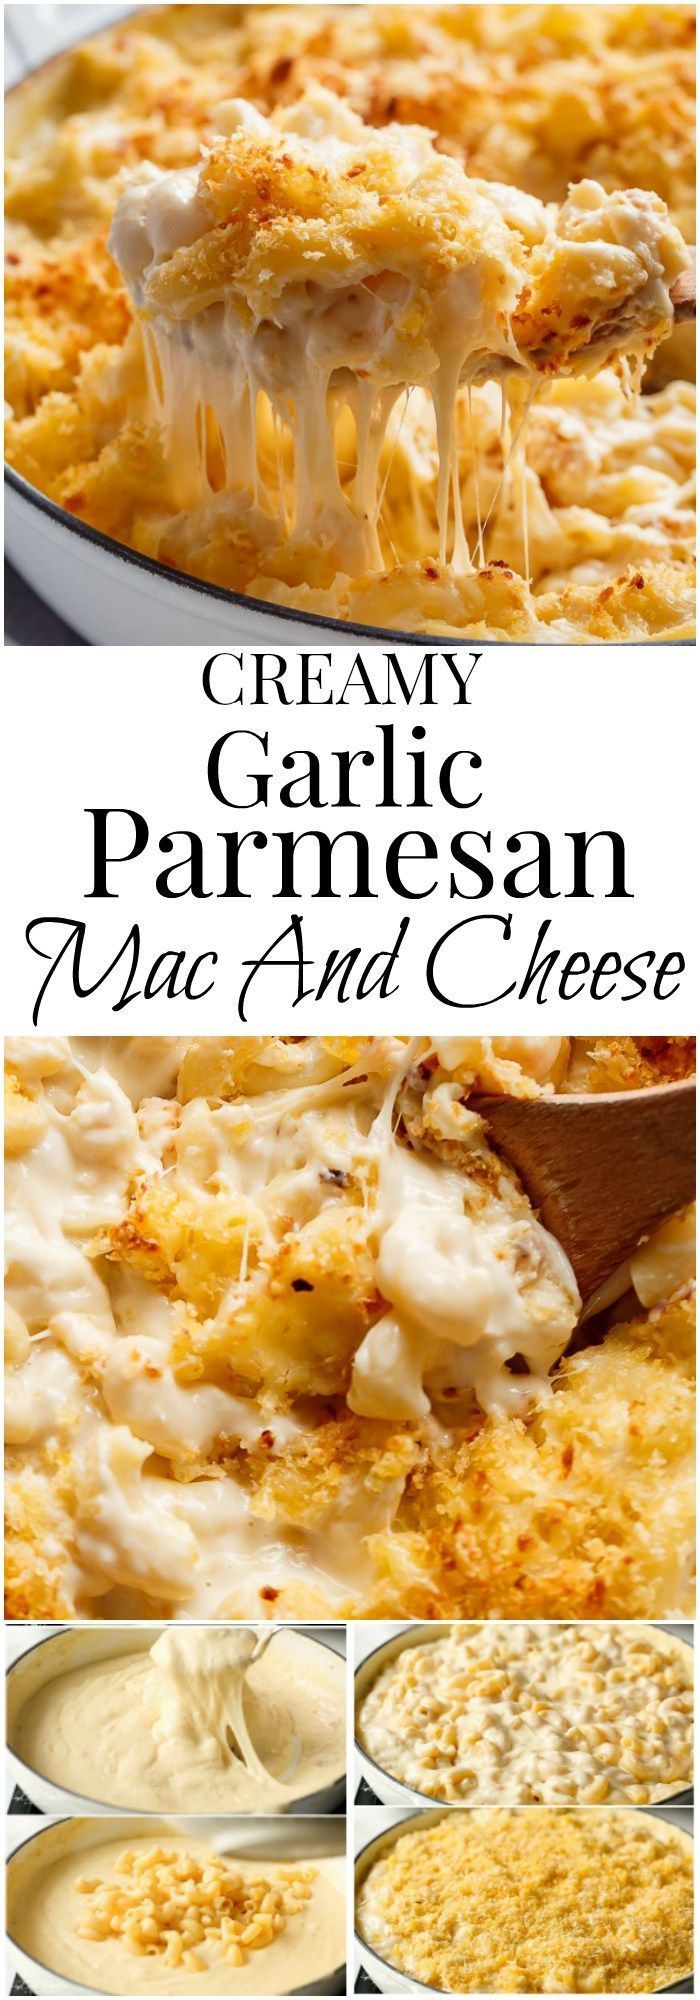 Garlic Parmesan Mac And Cheese is better than the original! A creamy garlic parmesan cheese sauce coats your macaroni, topped with